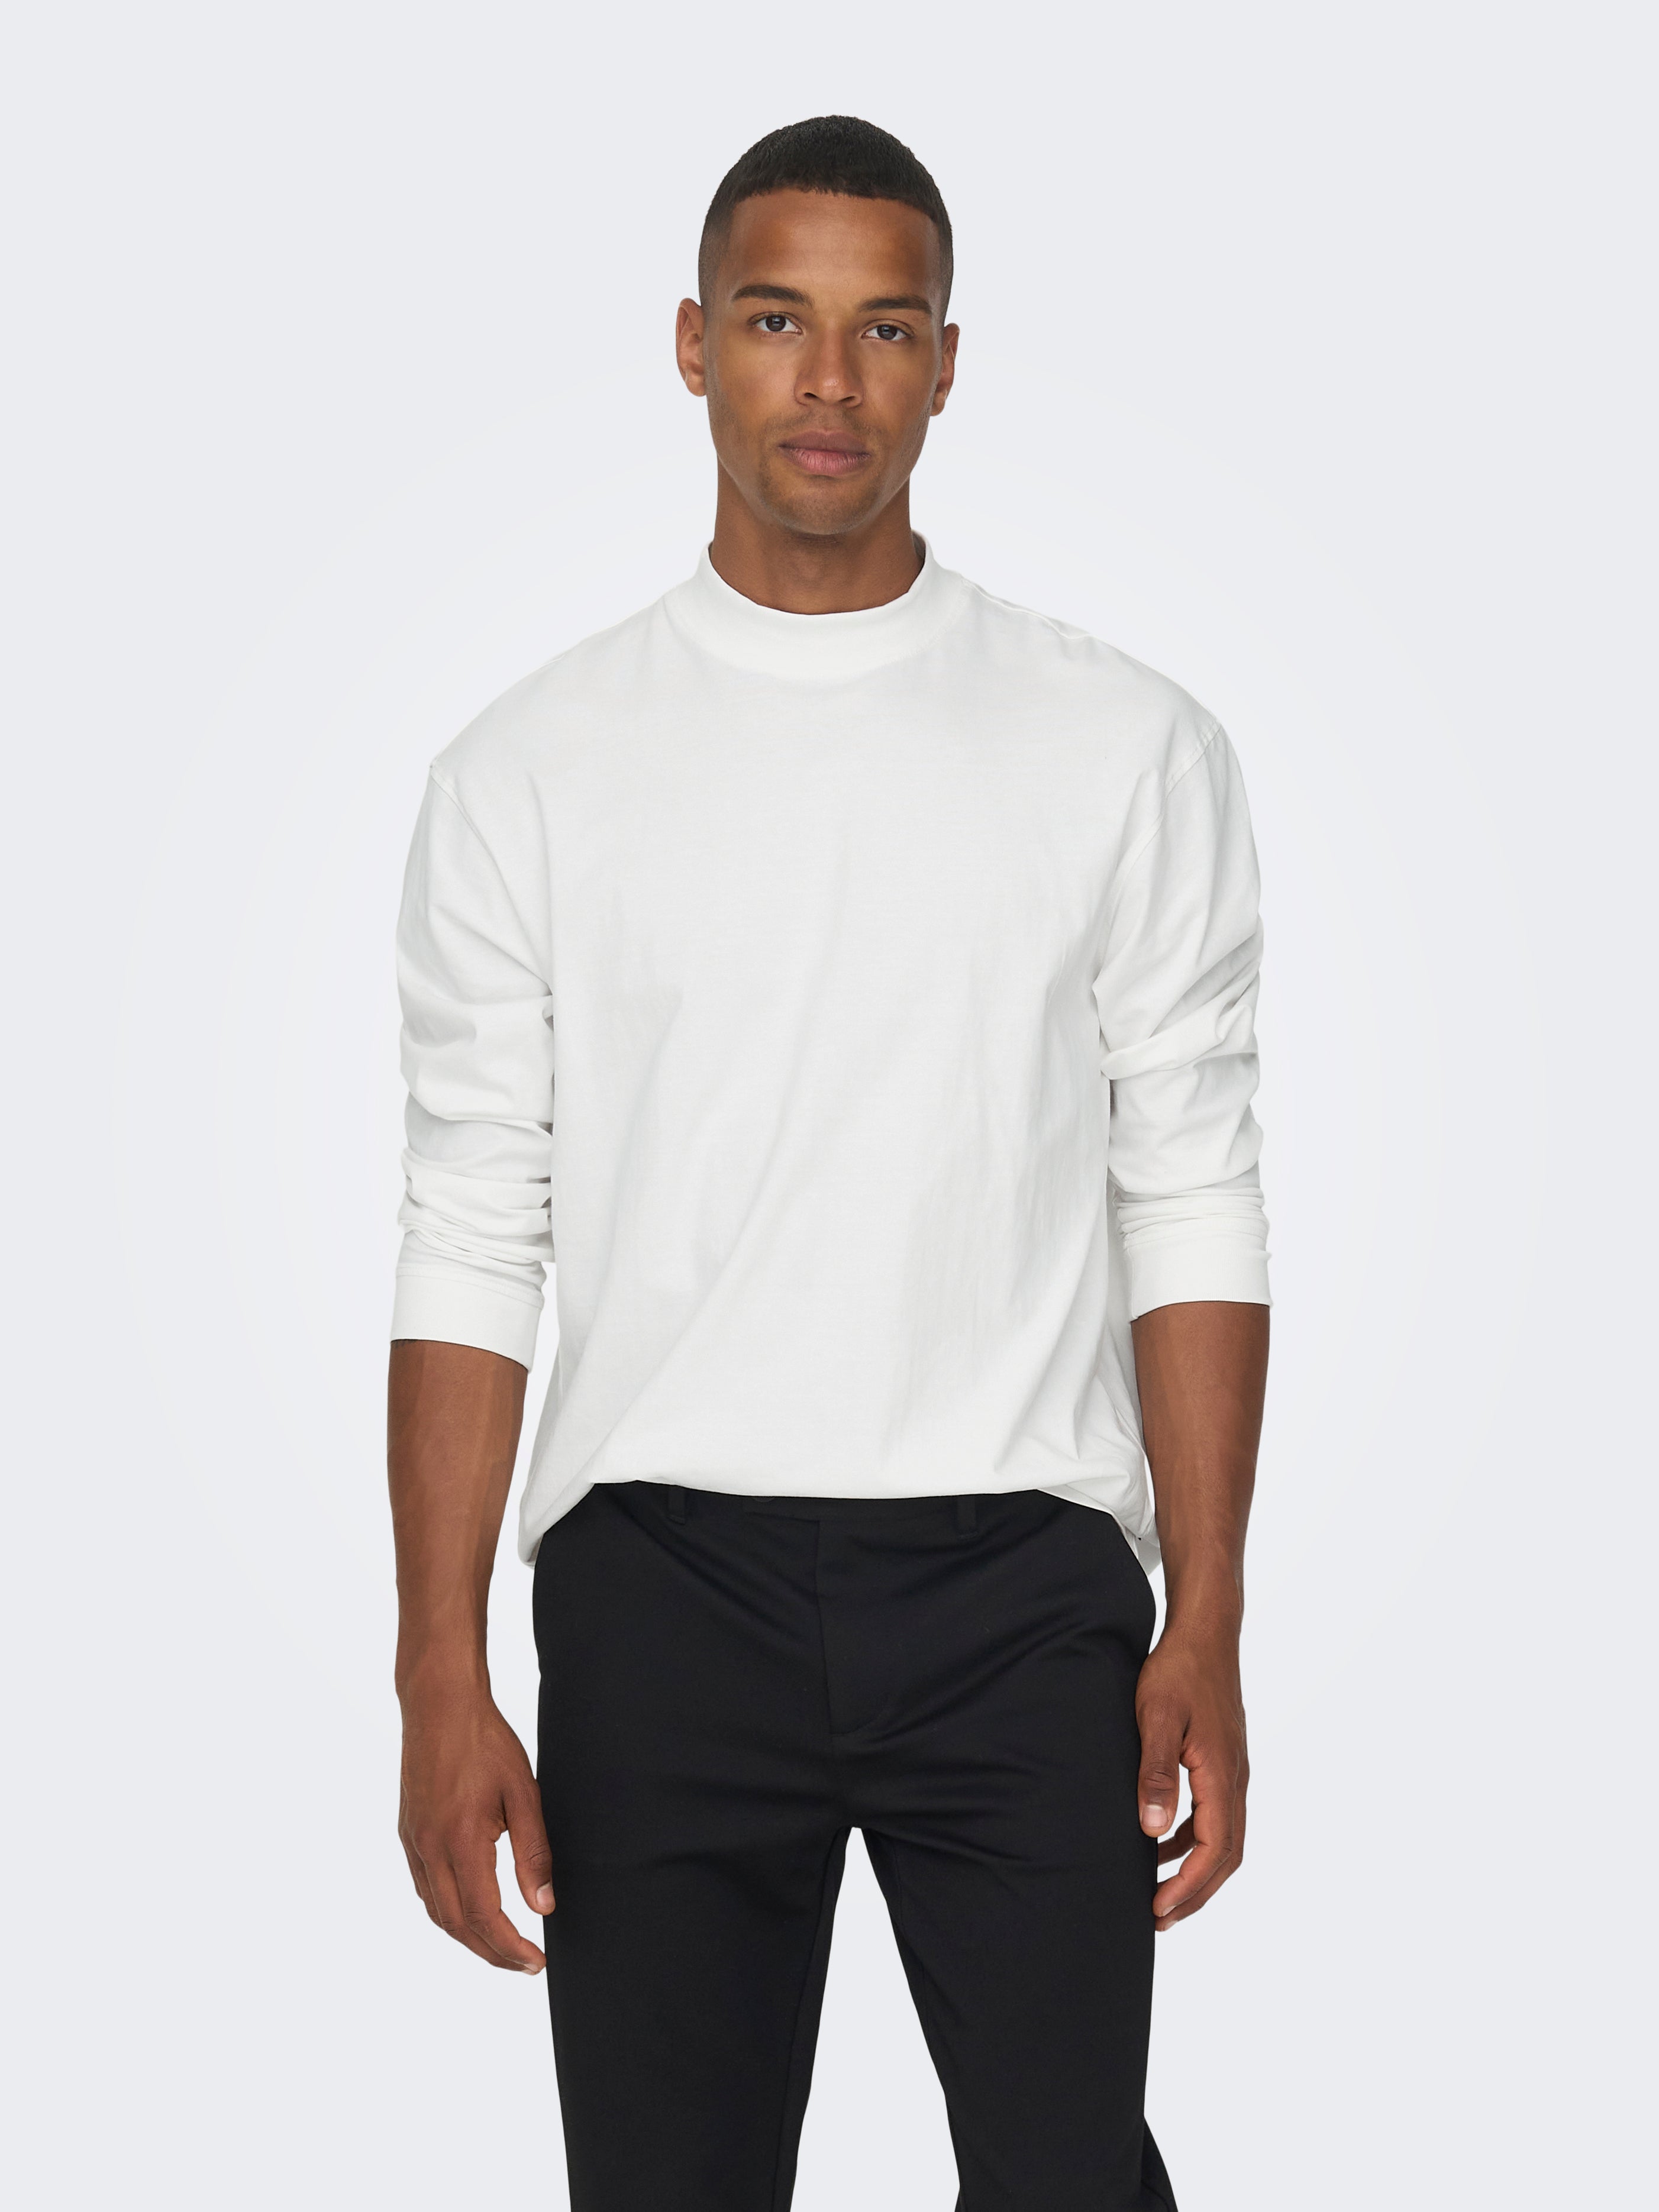 Relaxed Fit Mock neck T-Shirt